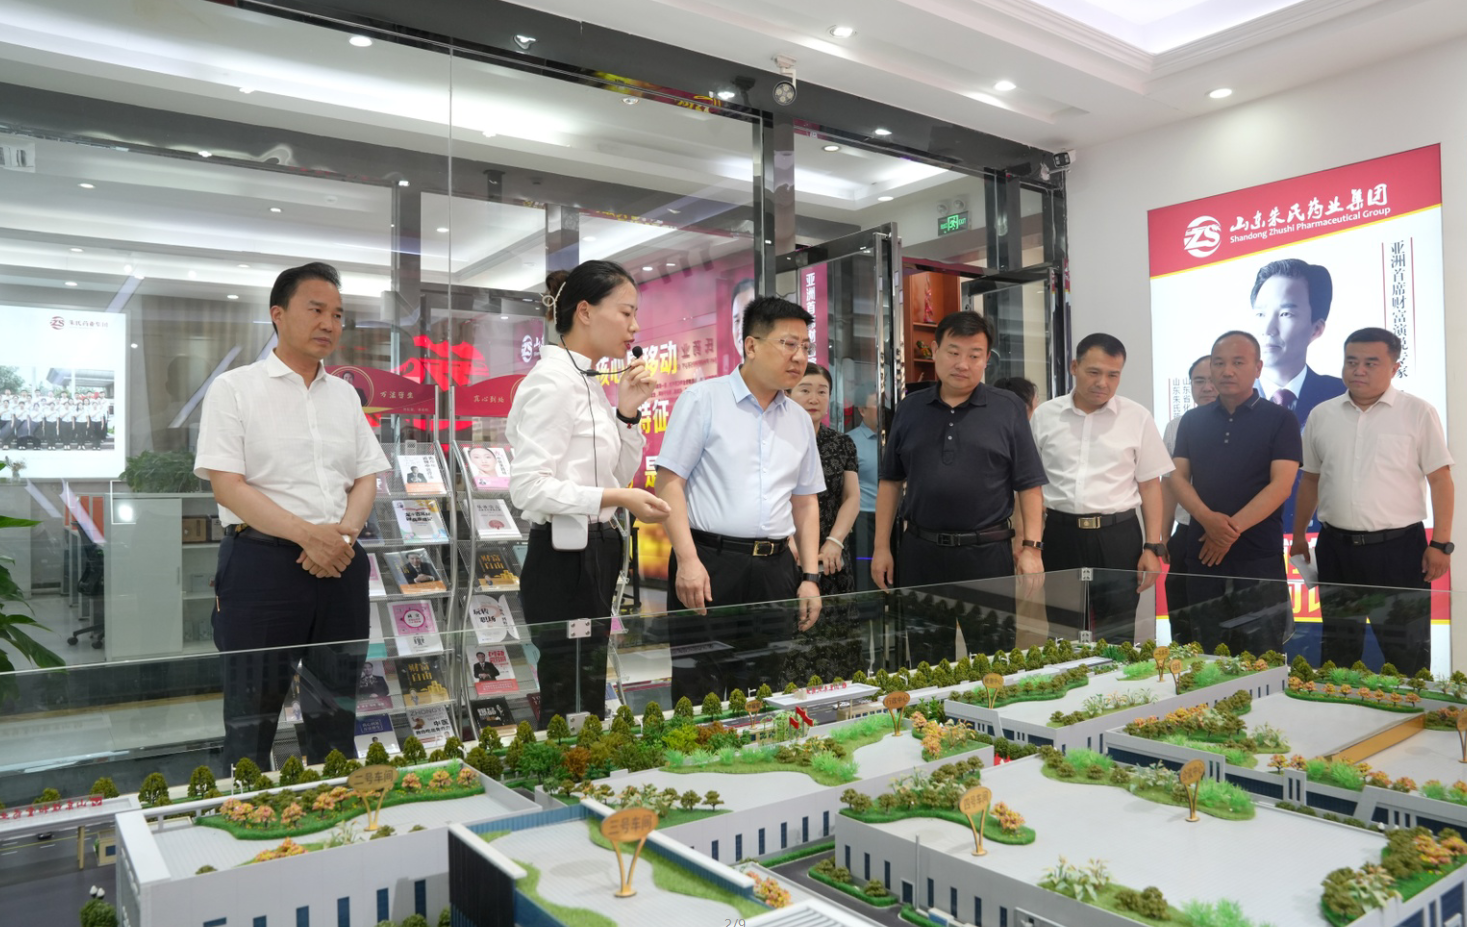 The leaders of Heze City visited Zhu's Pharmaceutical Group